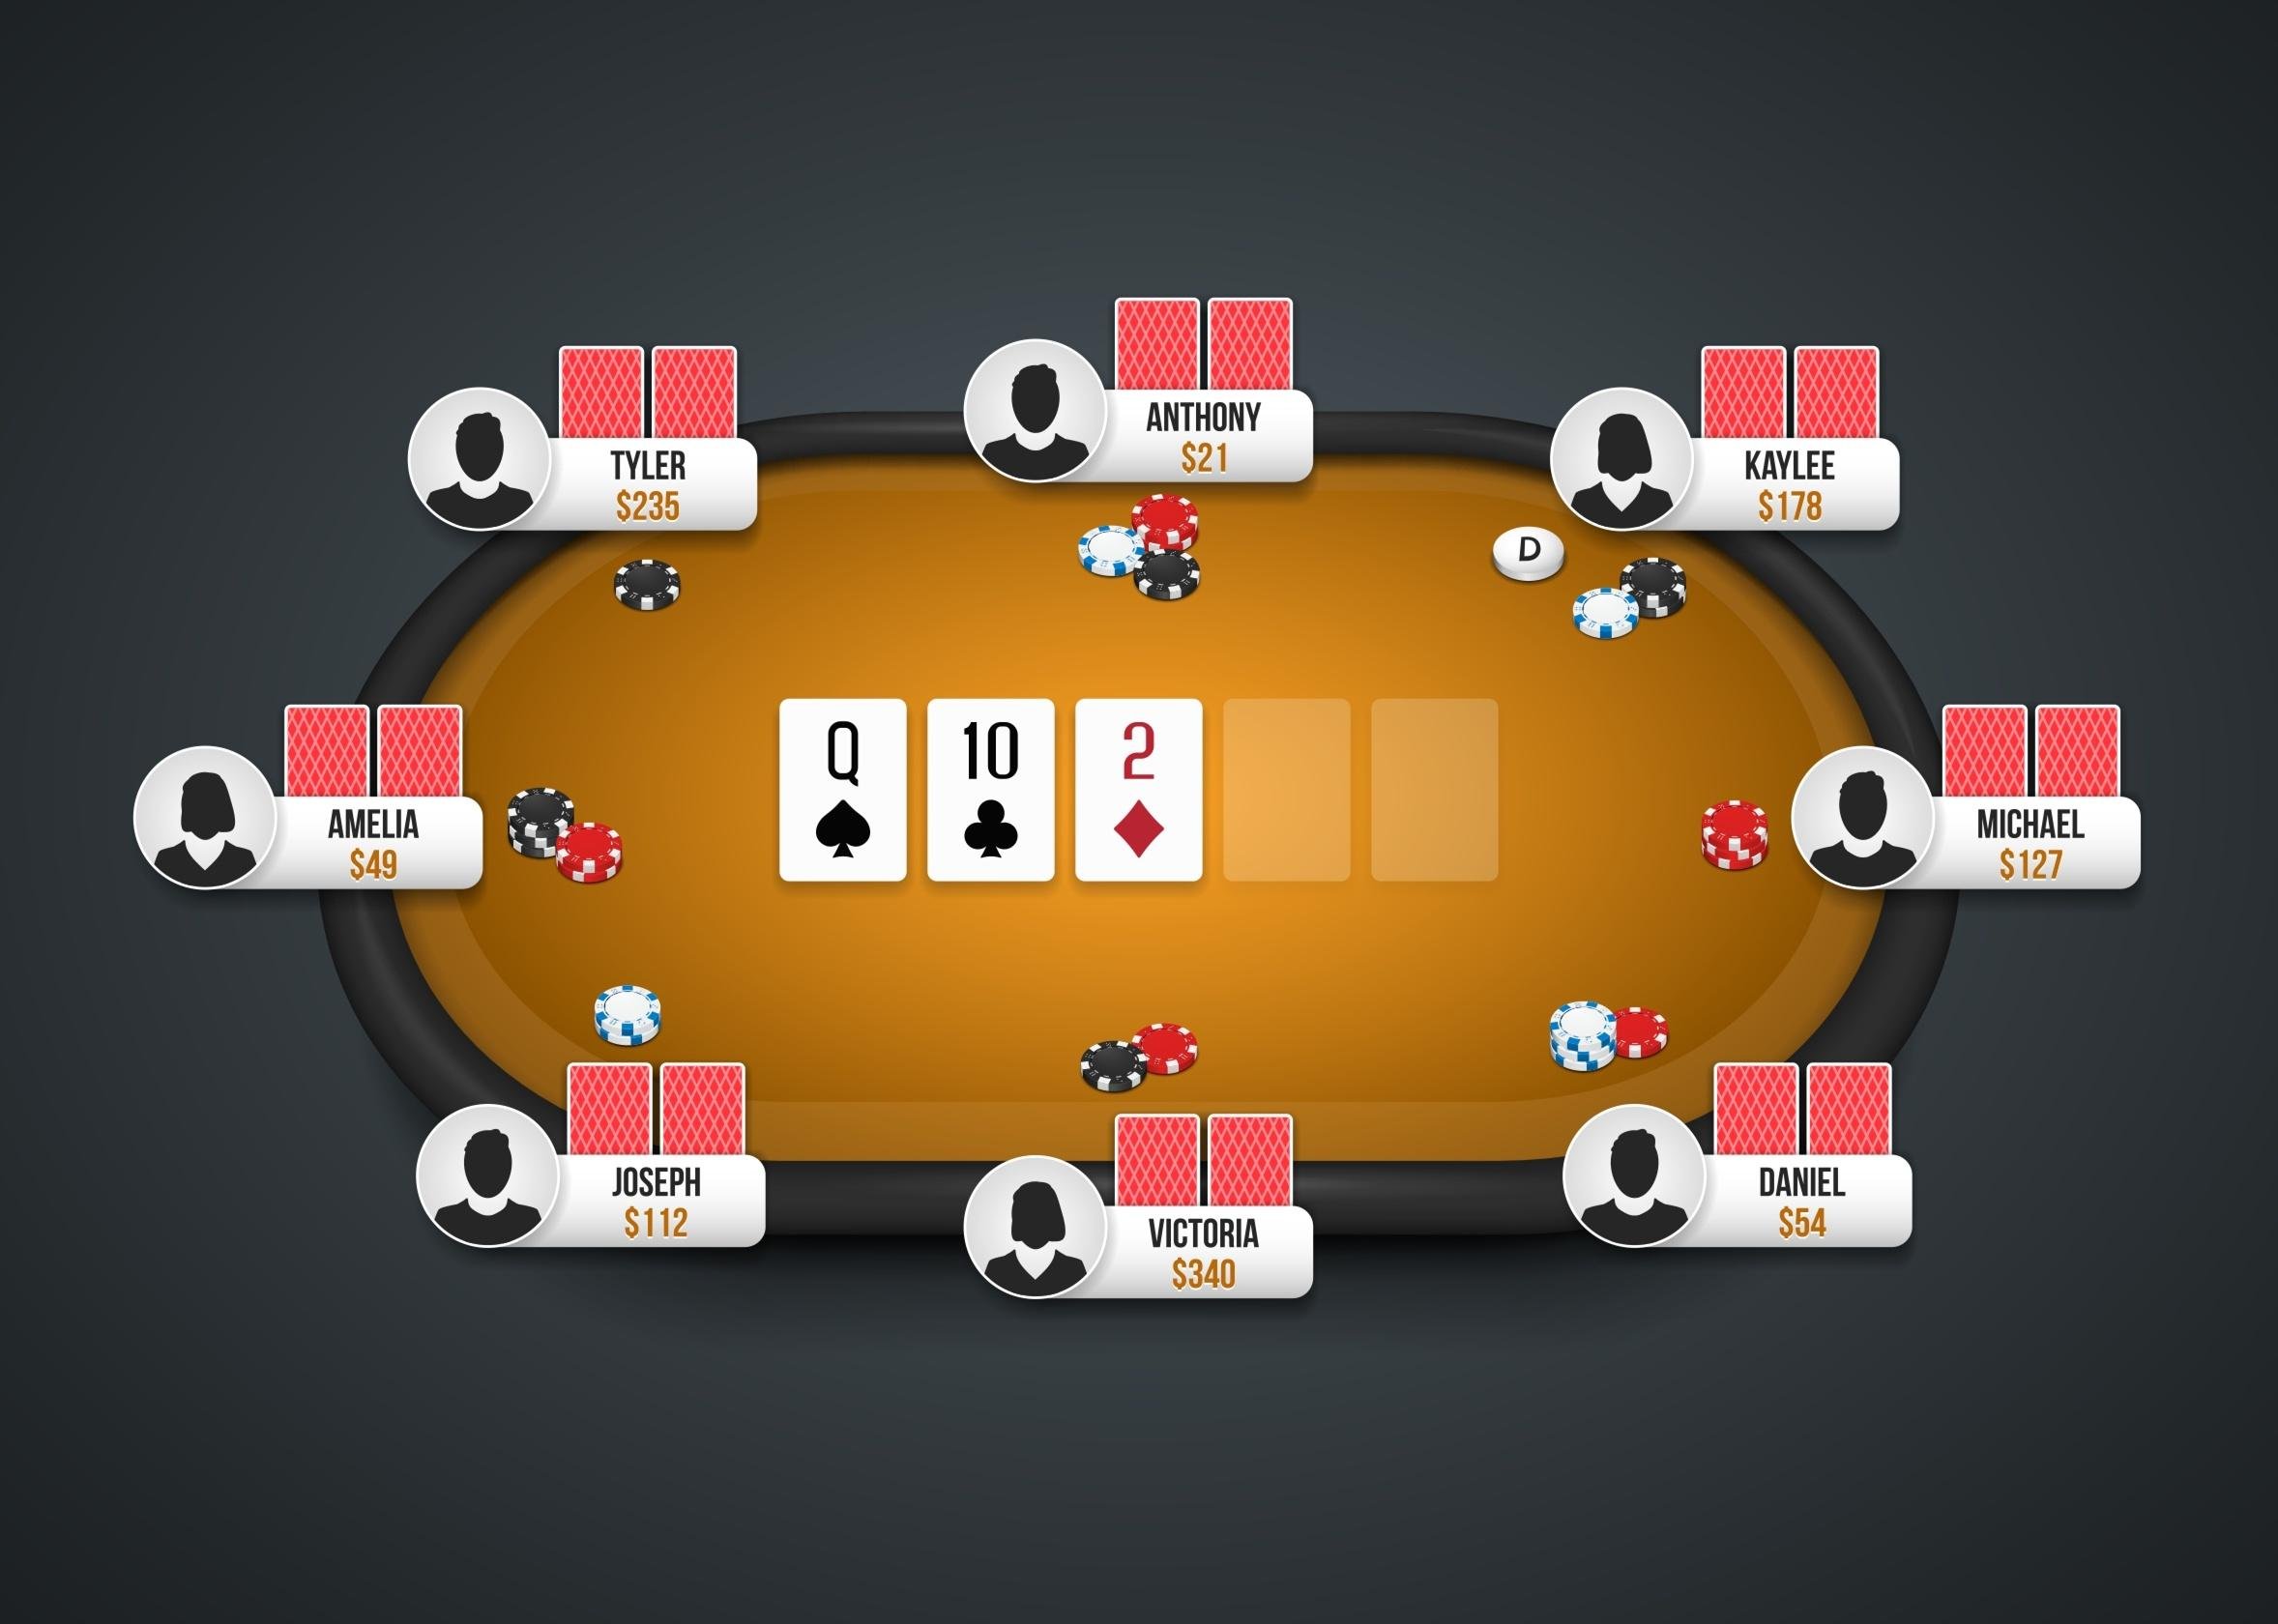 Online screen of a poker table with players, cards, and chips.